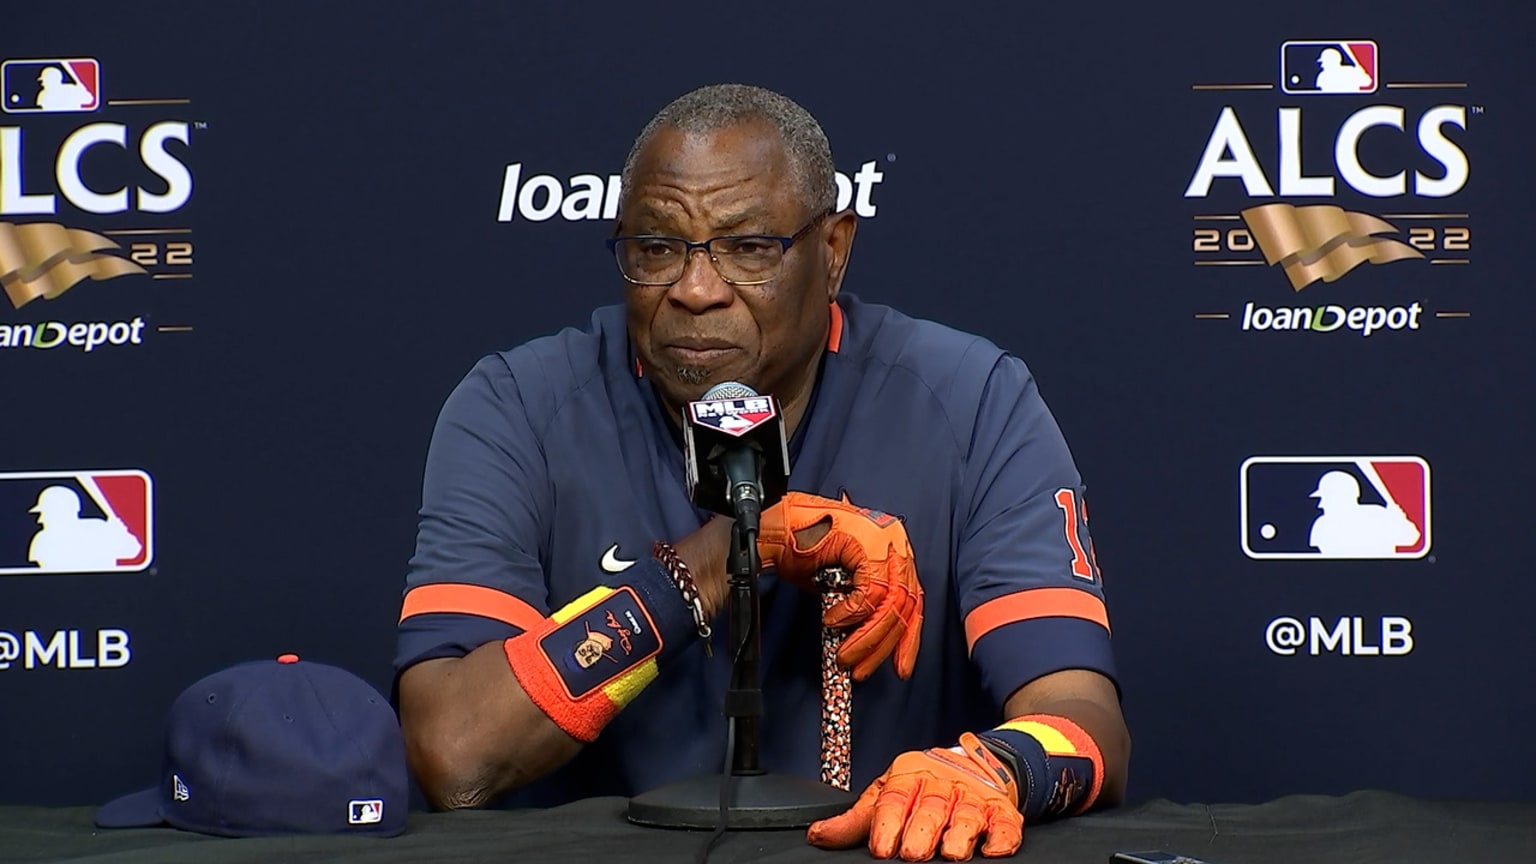 Dusty Baker had prescient quote about Justin Verlander before Game 5